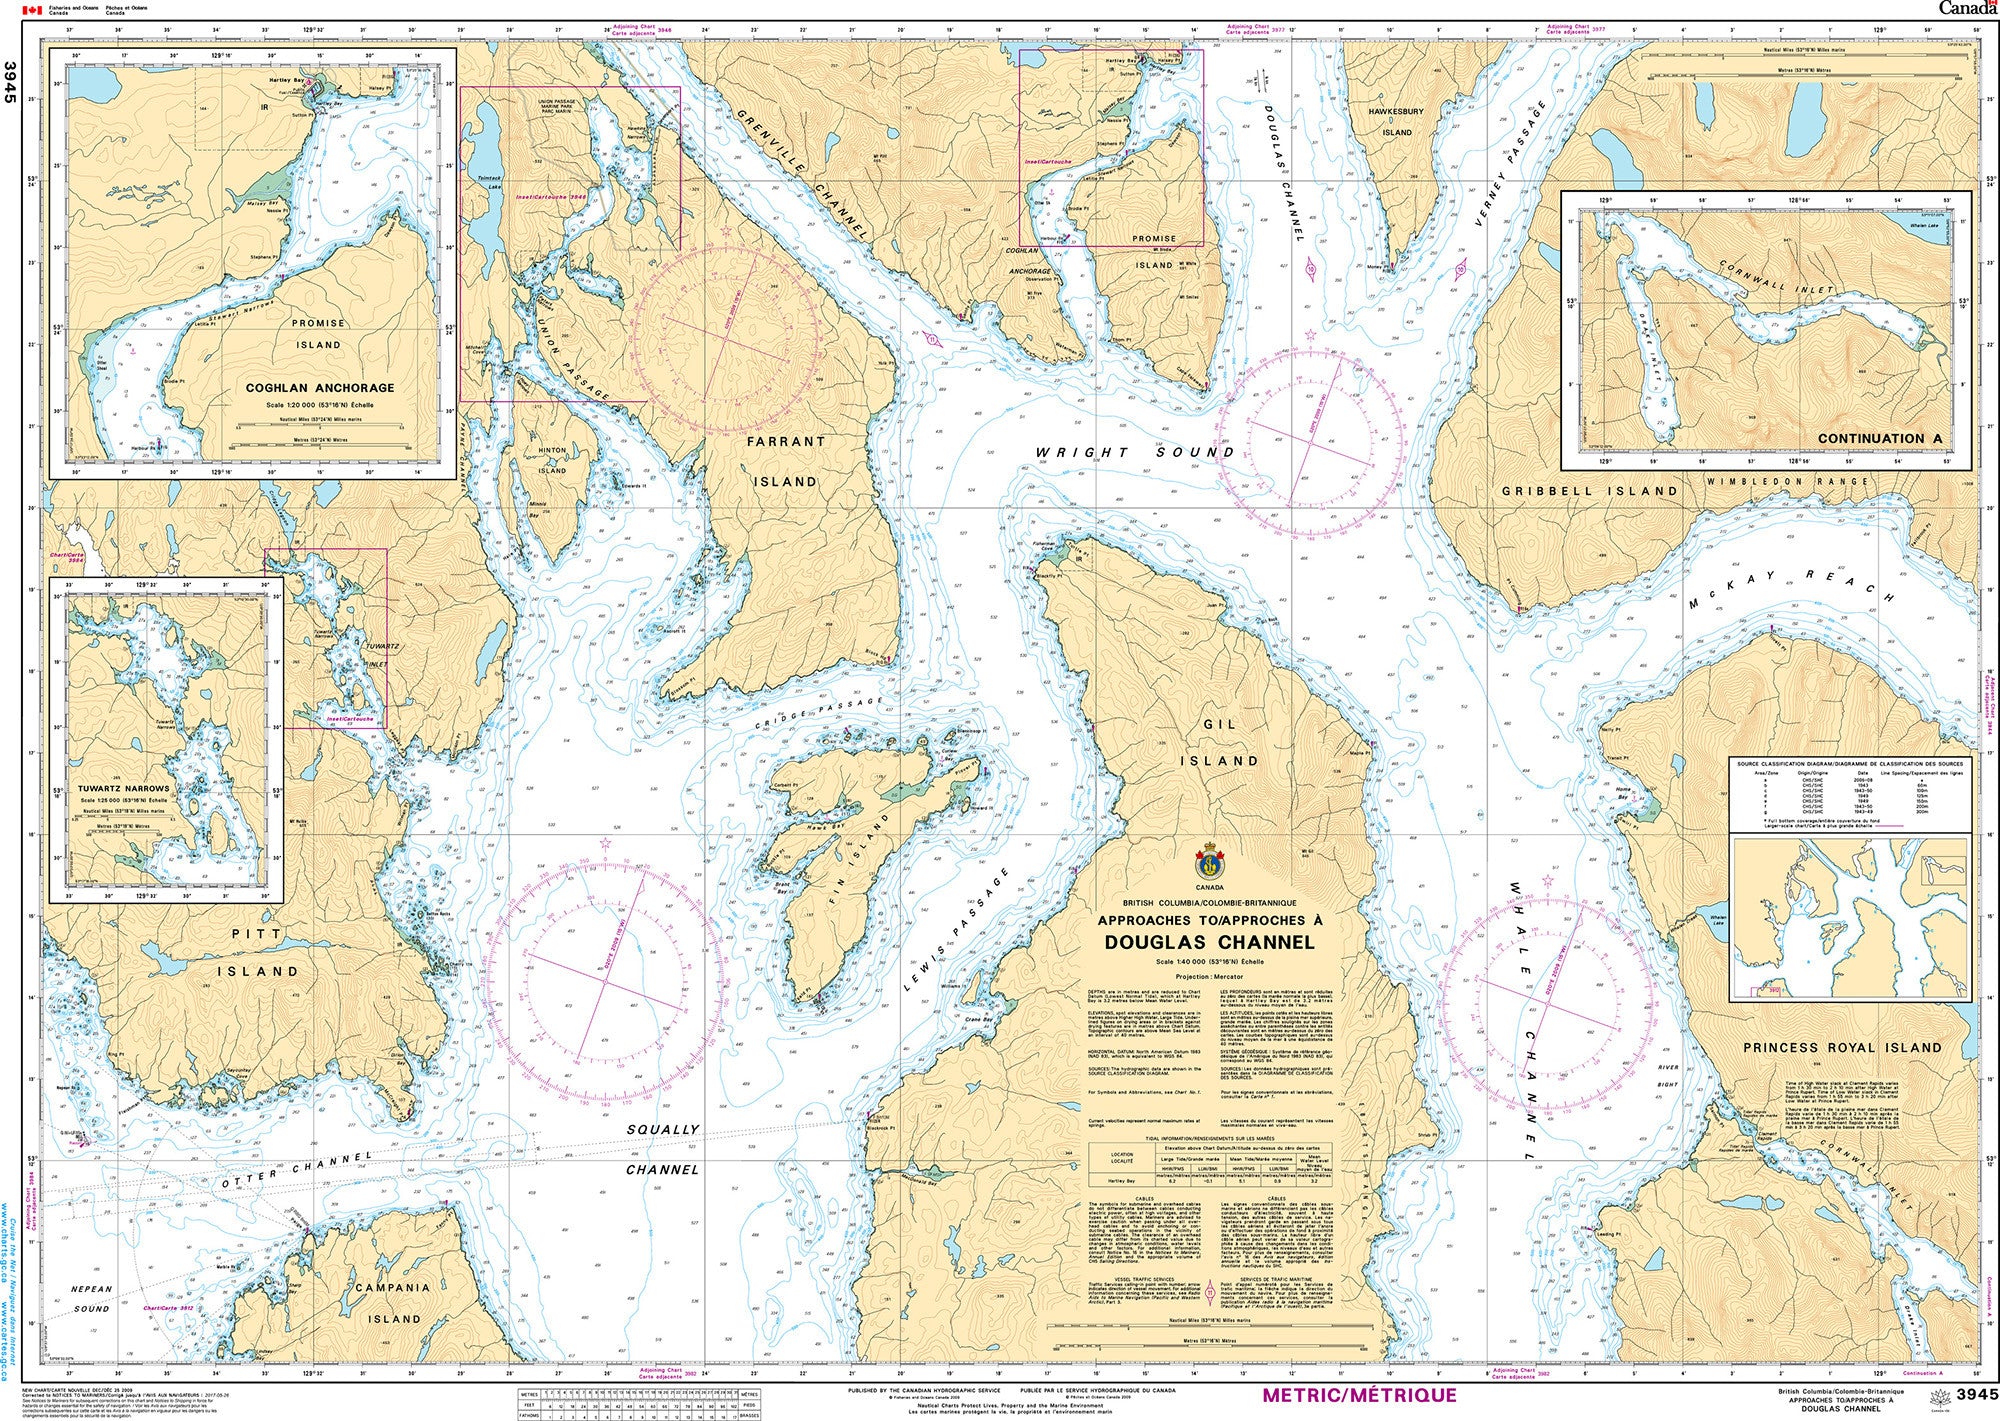 Canadian Hydrographic Service Nautical Chart CHS3945: Approaches to/Approches à Douglas Channel